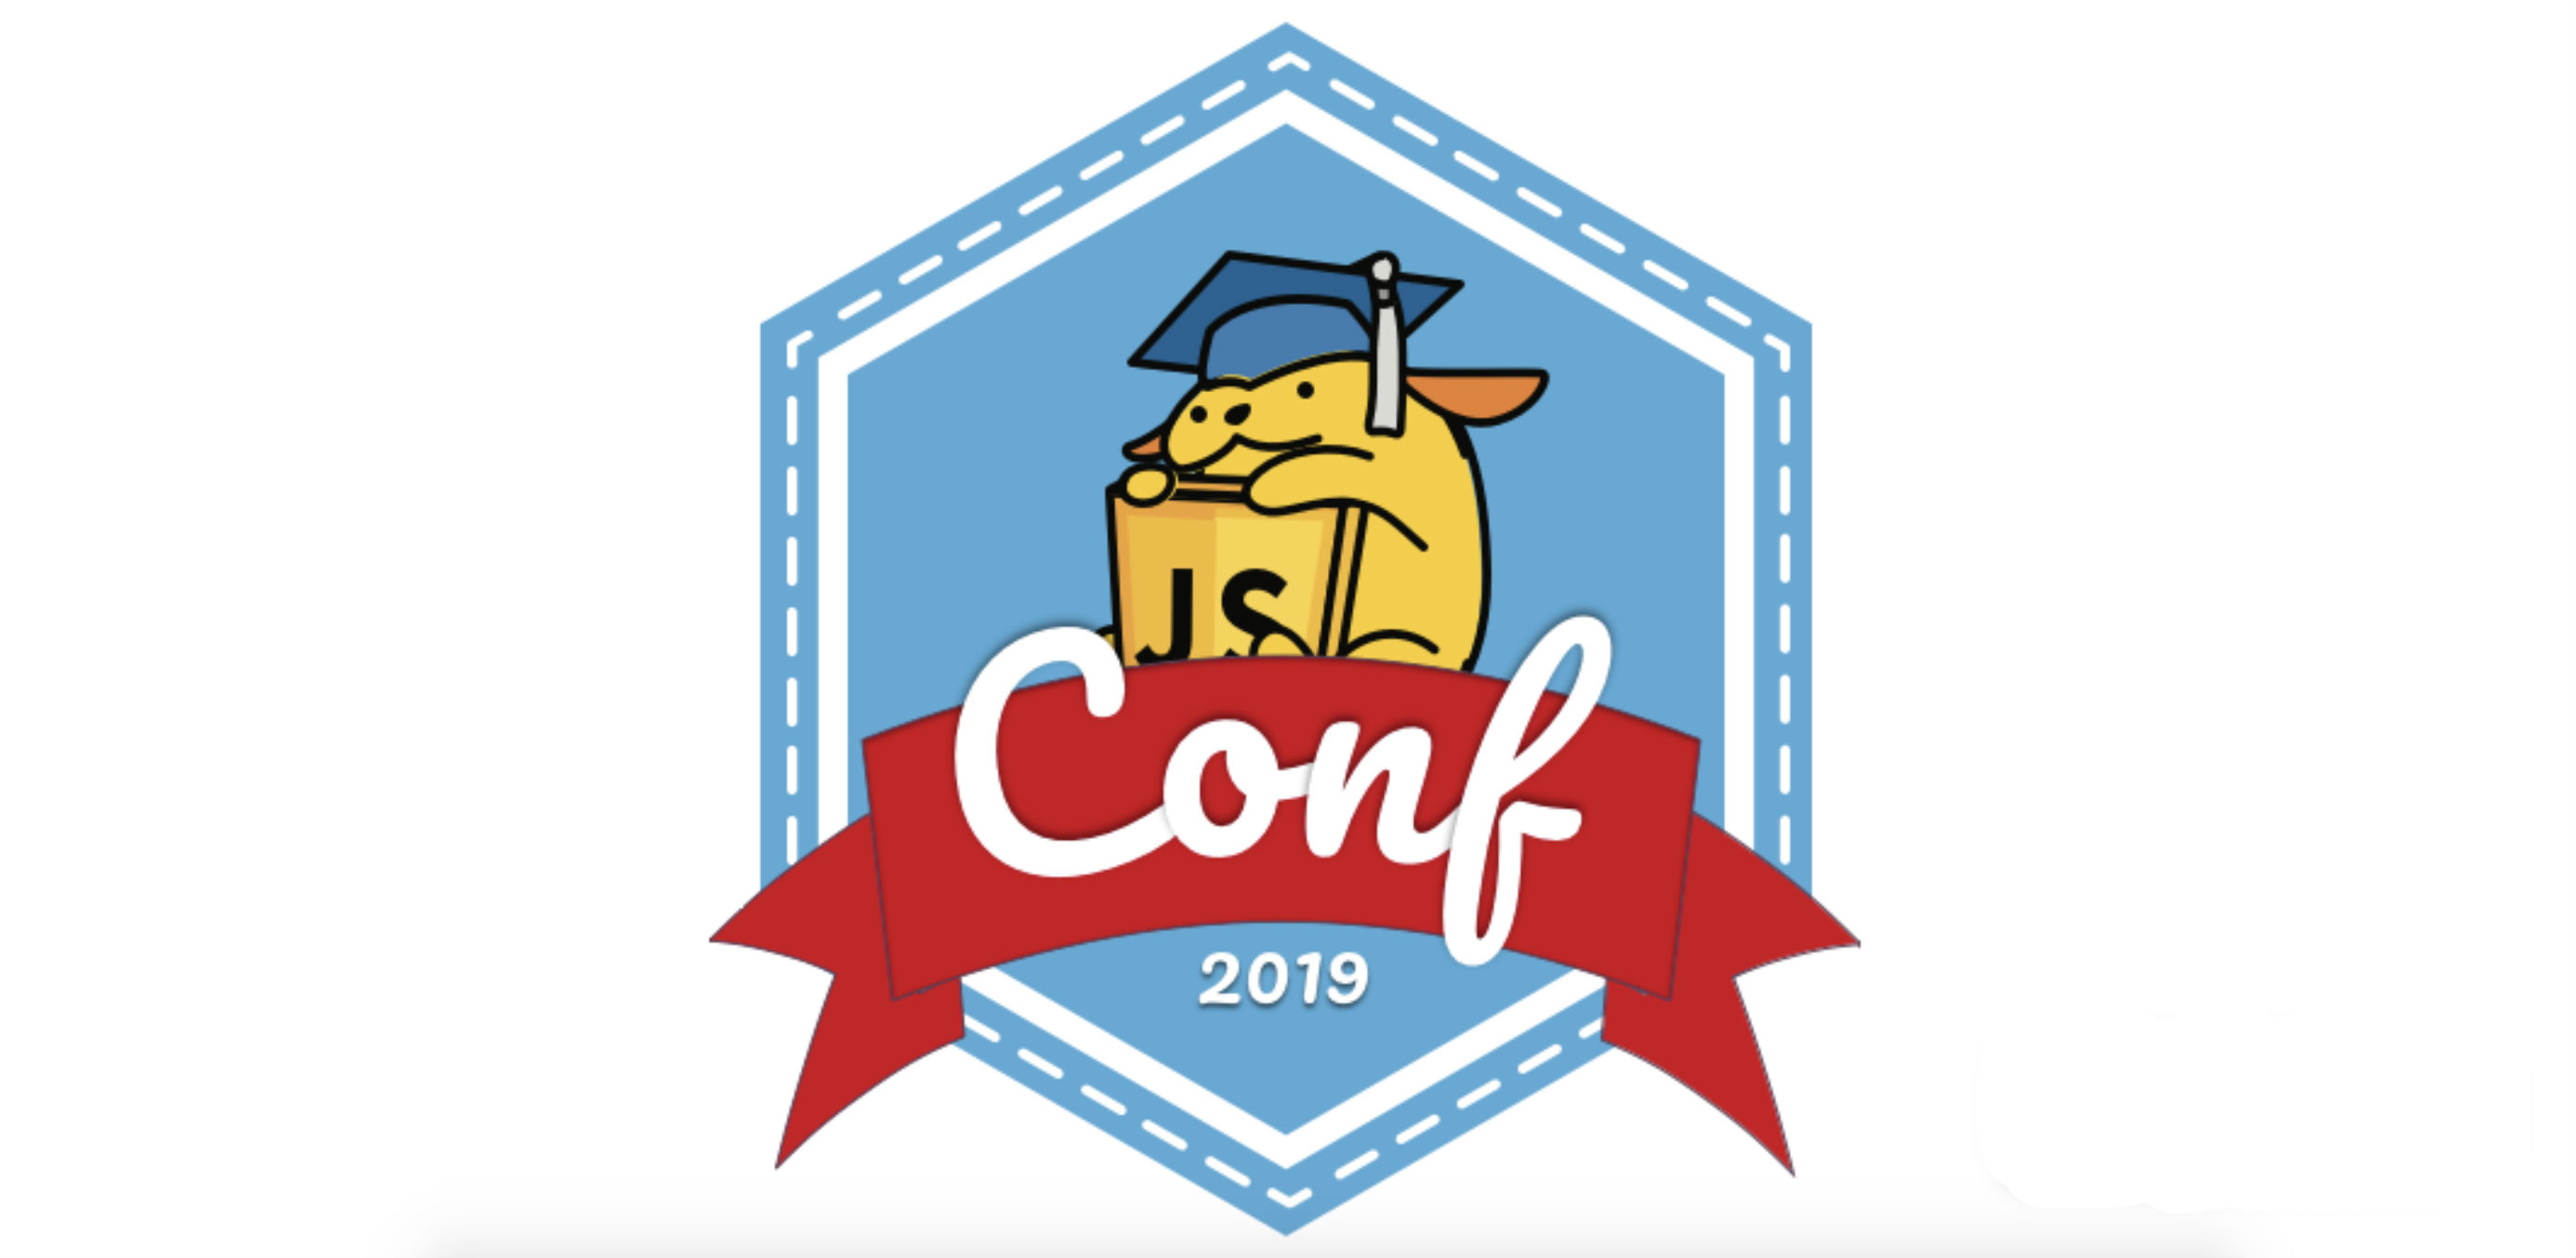 Speaker Applications Now Open for 2nd Annual JavaScript for WordPress Conference, July 11-13, 2019